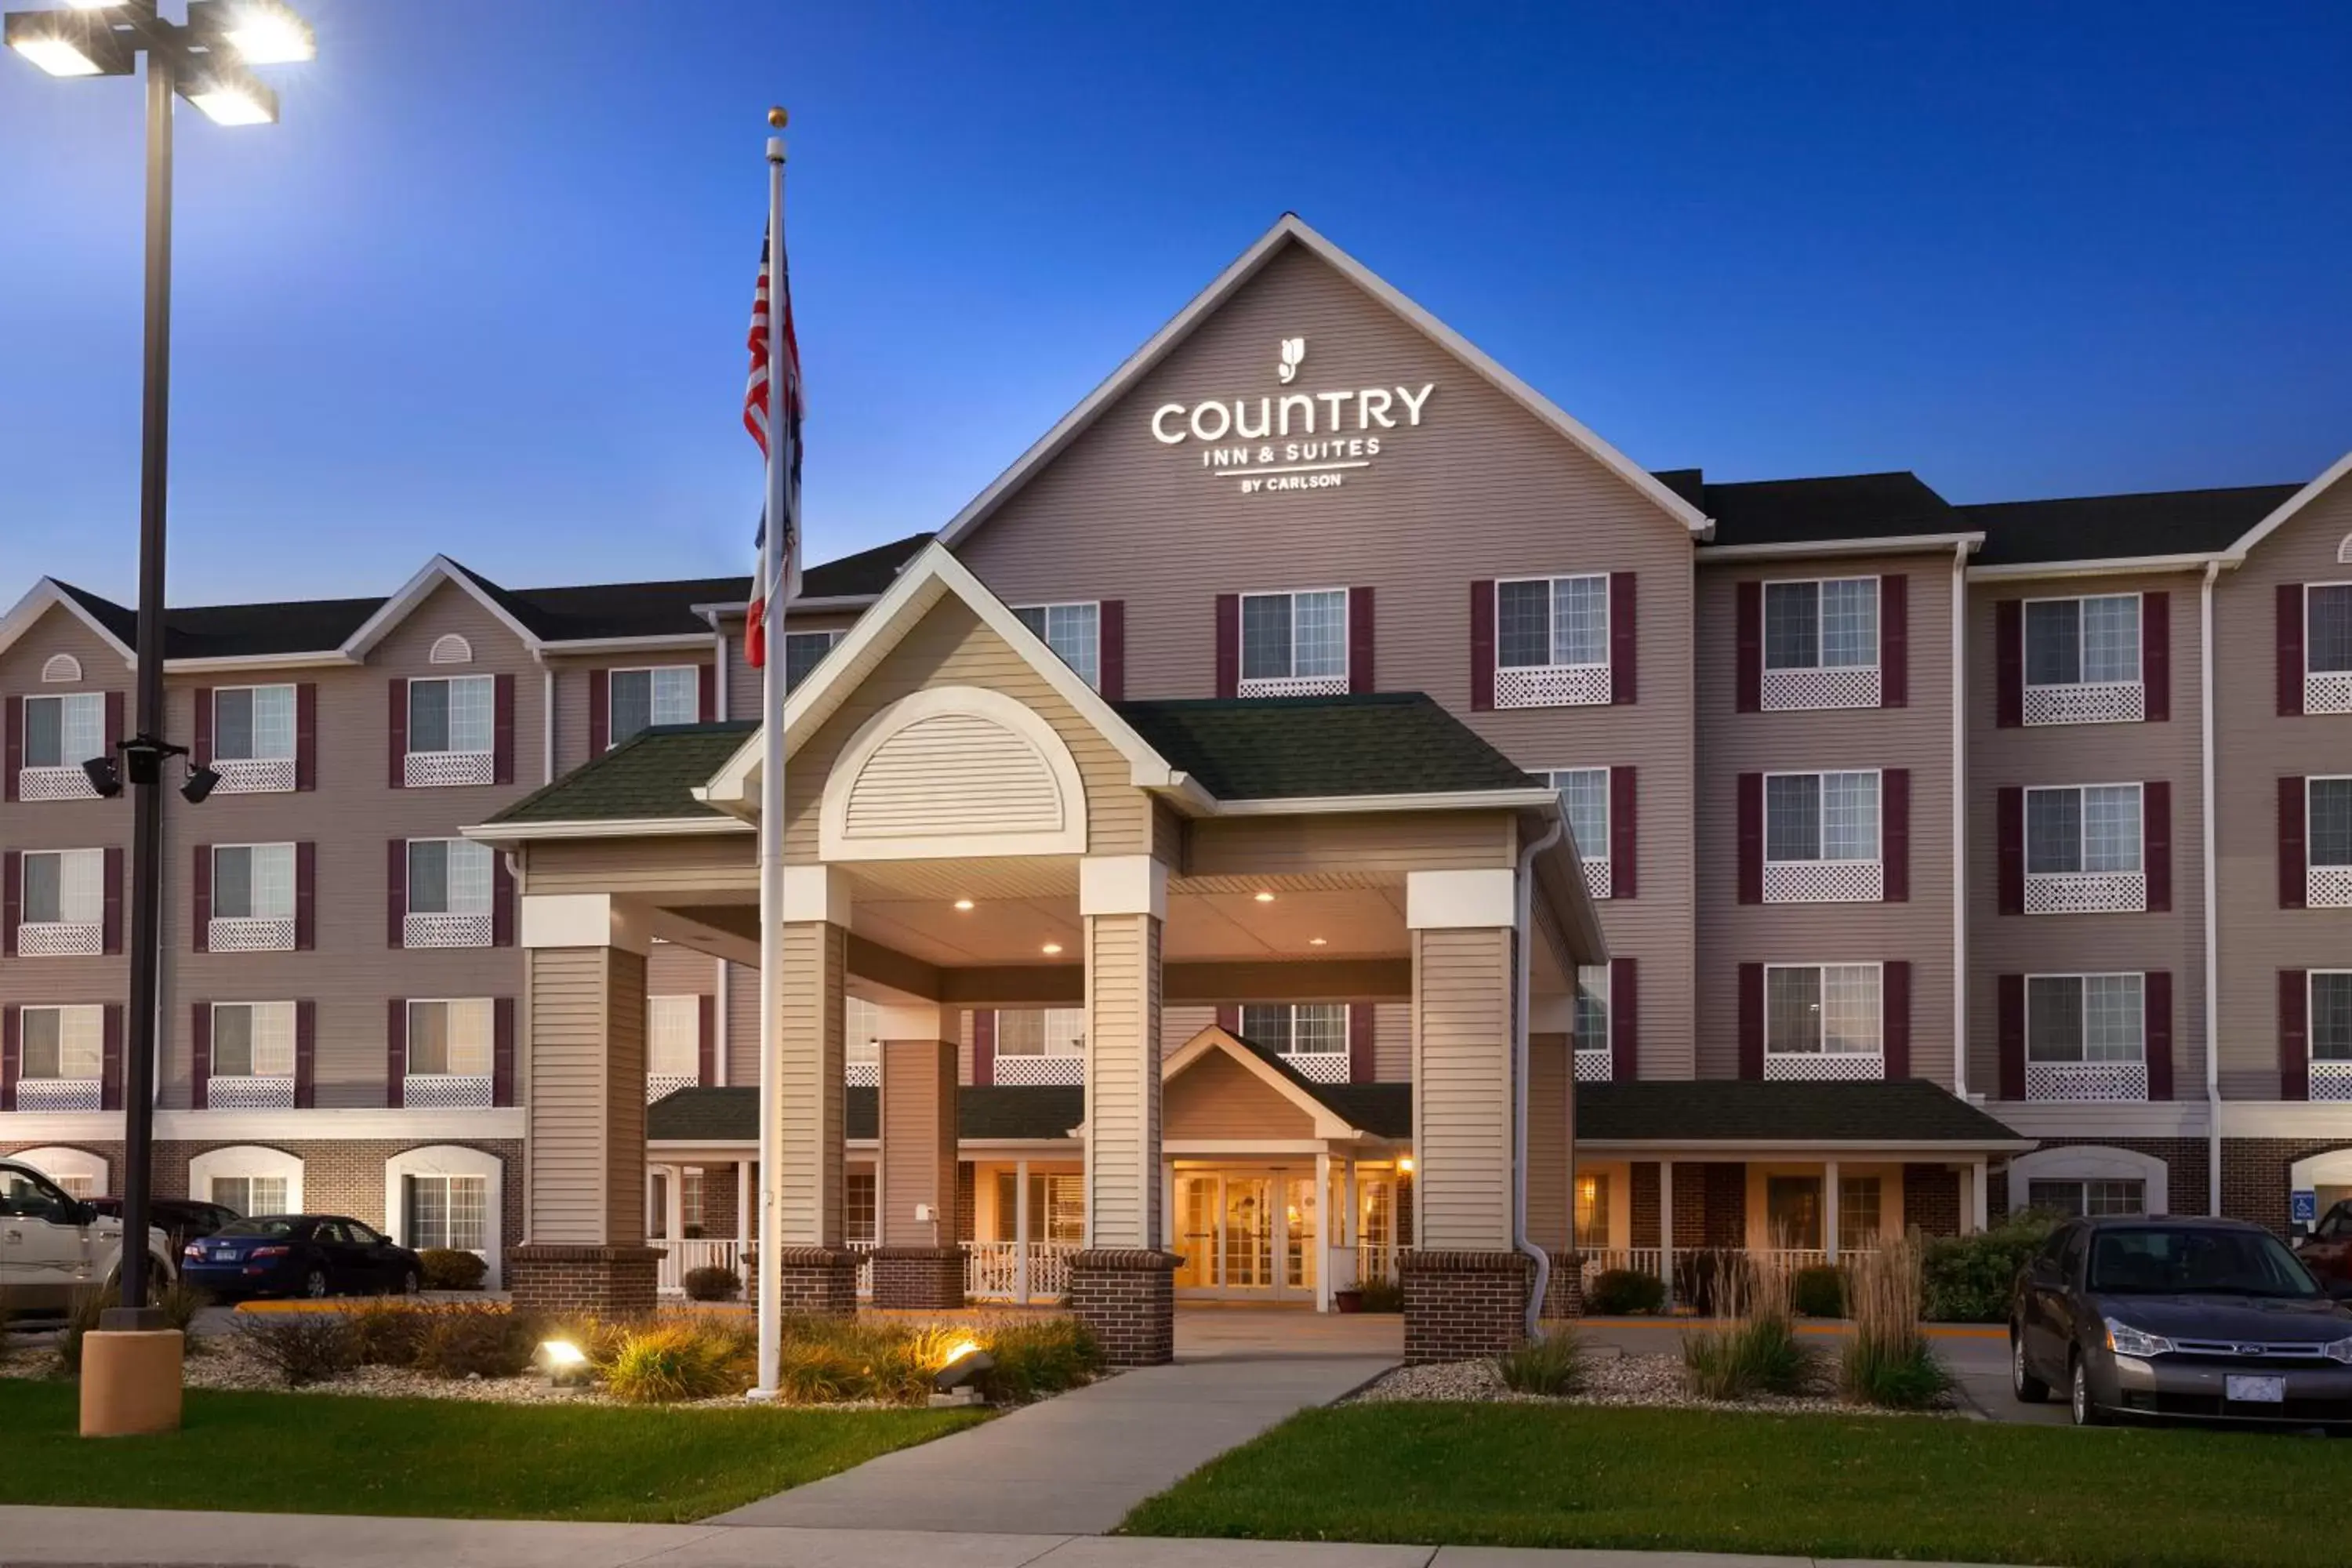 Facade/entrance, Property Building in Country Inn & Suites by Radisson, Northwood, IA